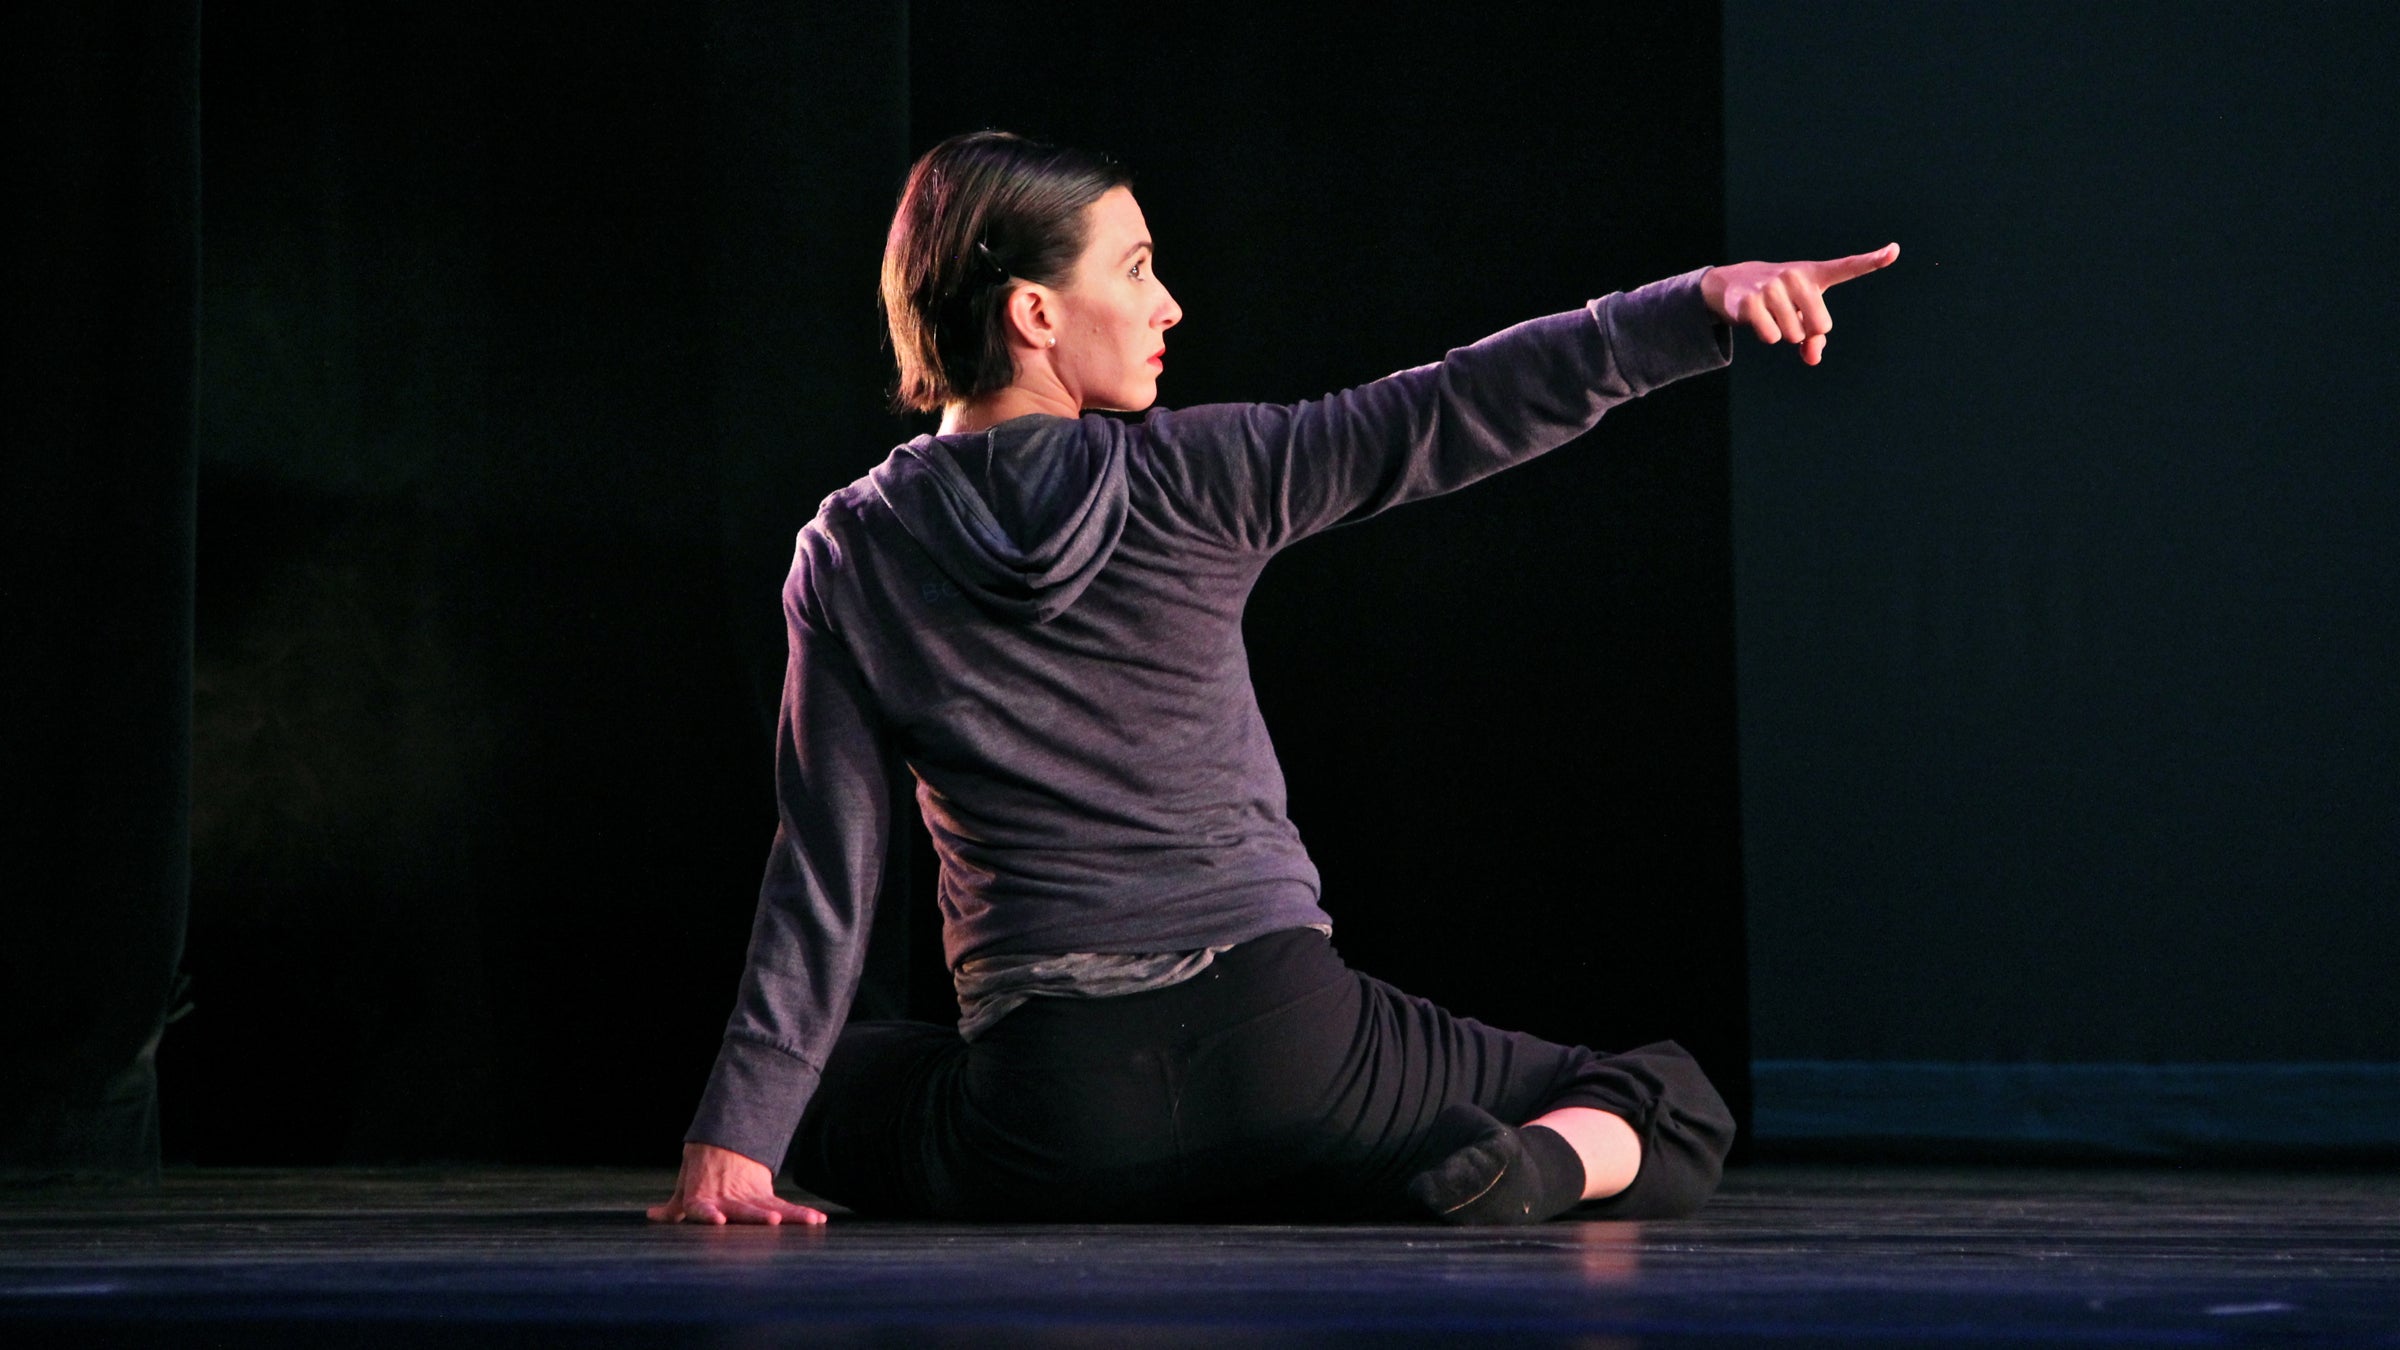 Tina Finkelman Berkett,cofounder and co-artistic director for the Los Angeles-based dance company BODYTRAFFIC, rehearses for the group's performance at the Prince Theater. (Emma Lee/WHYY)